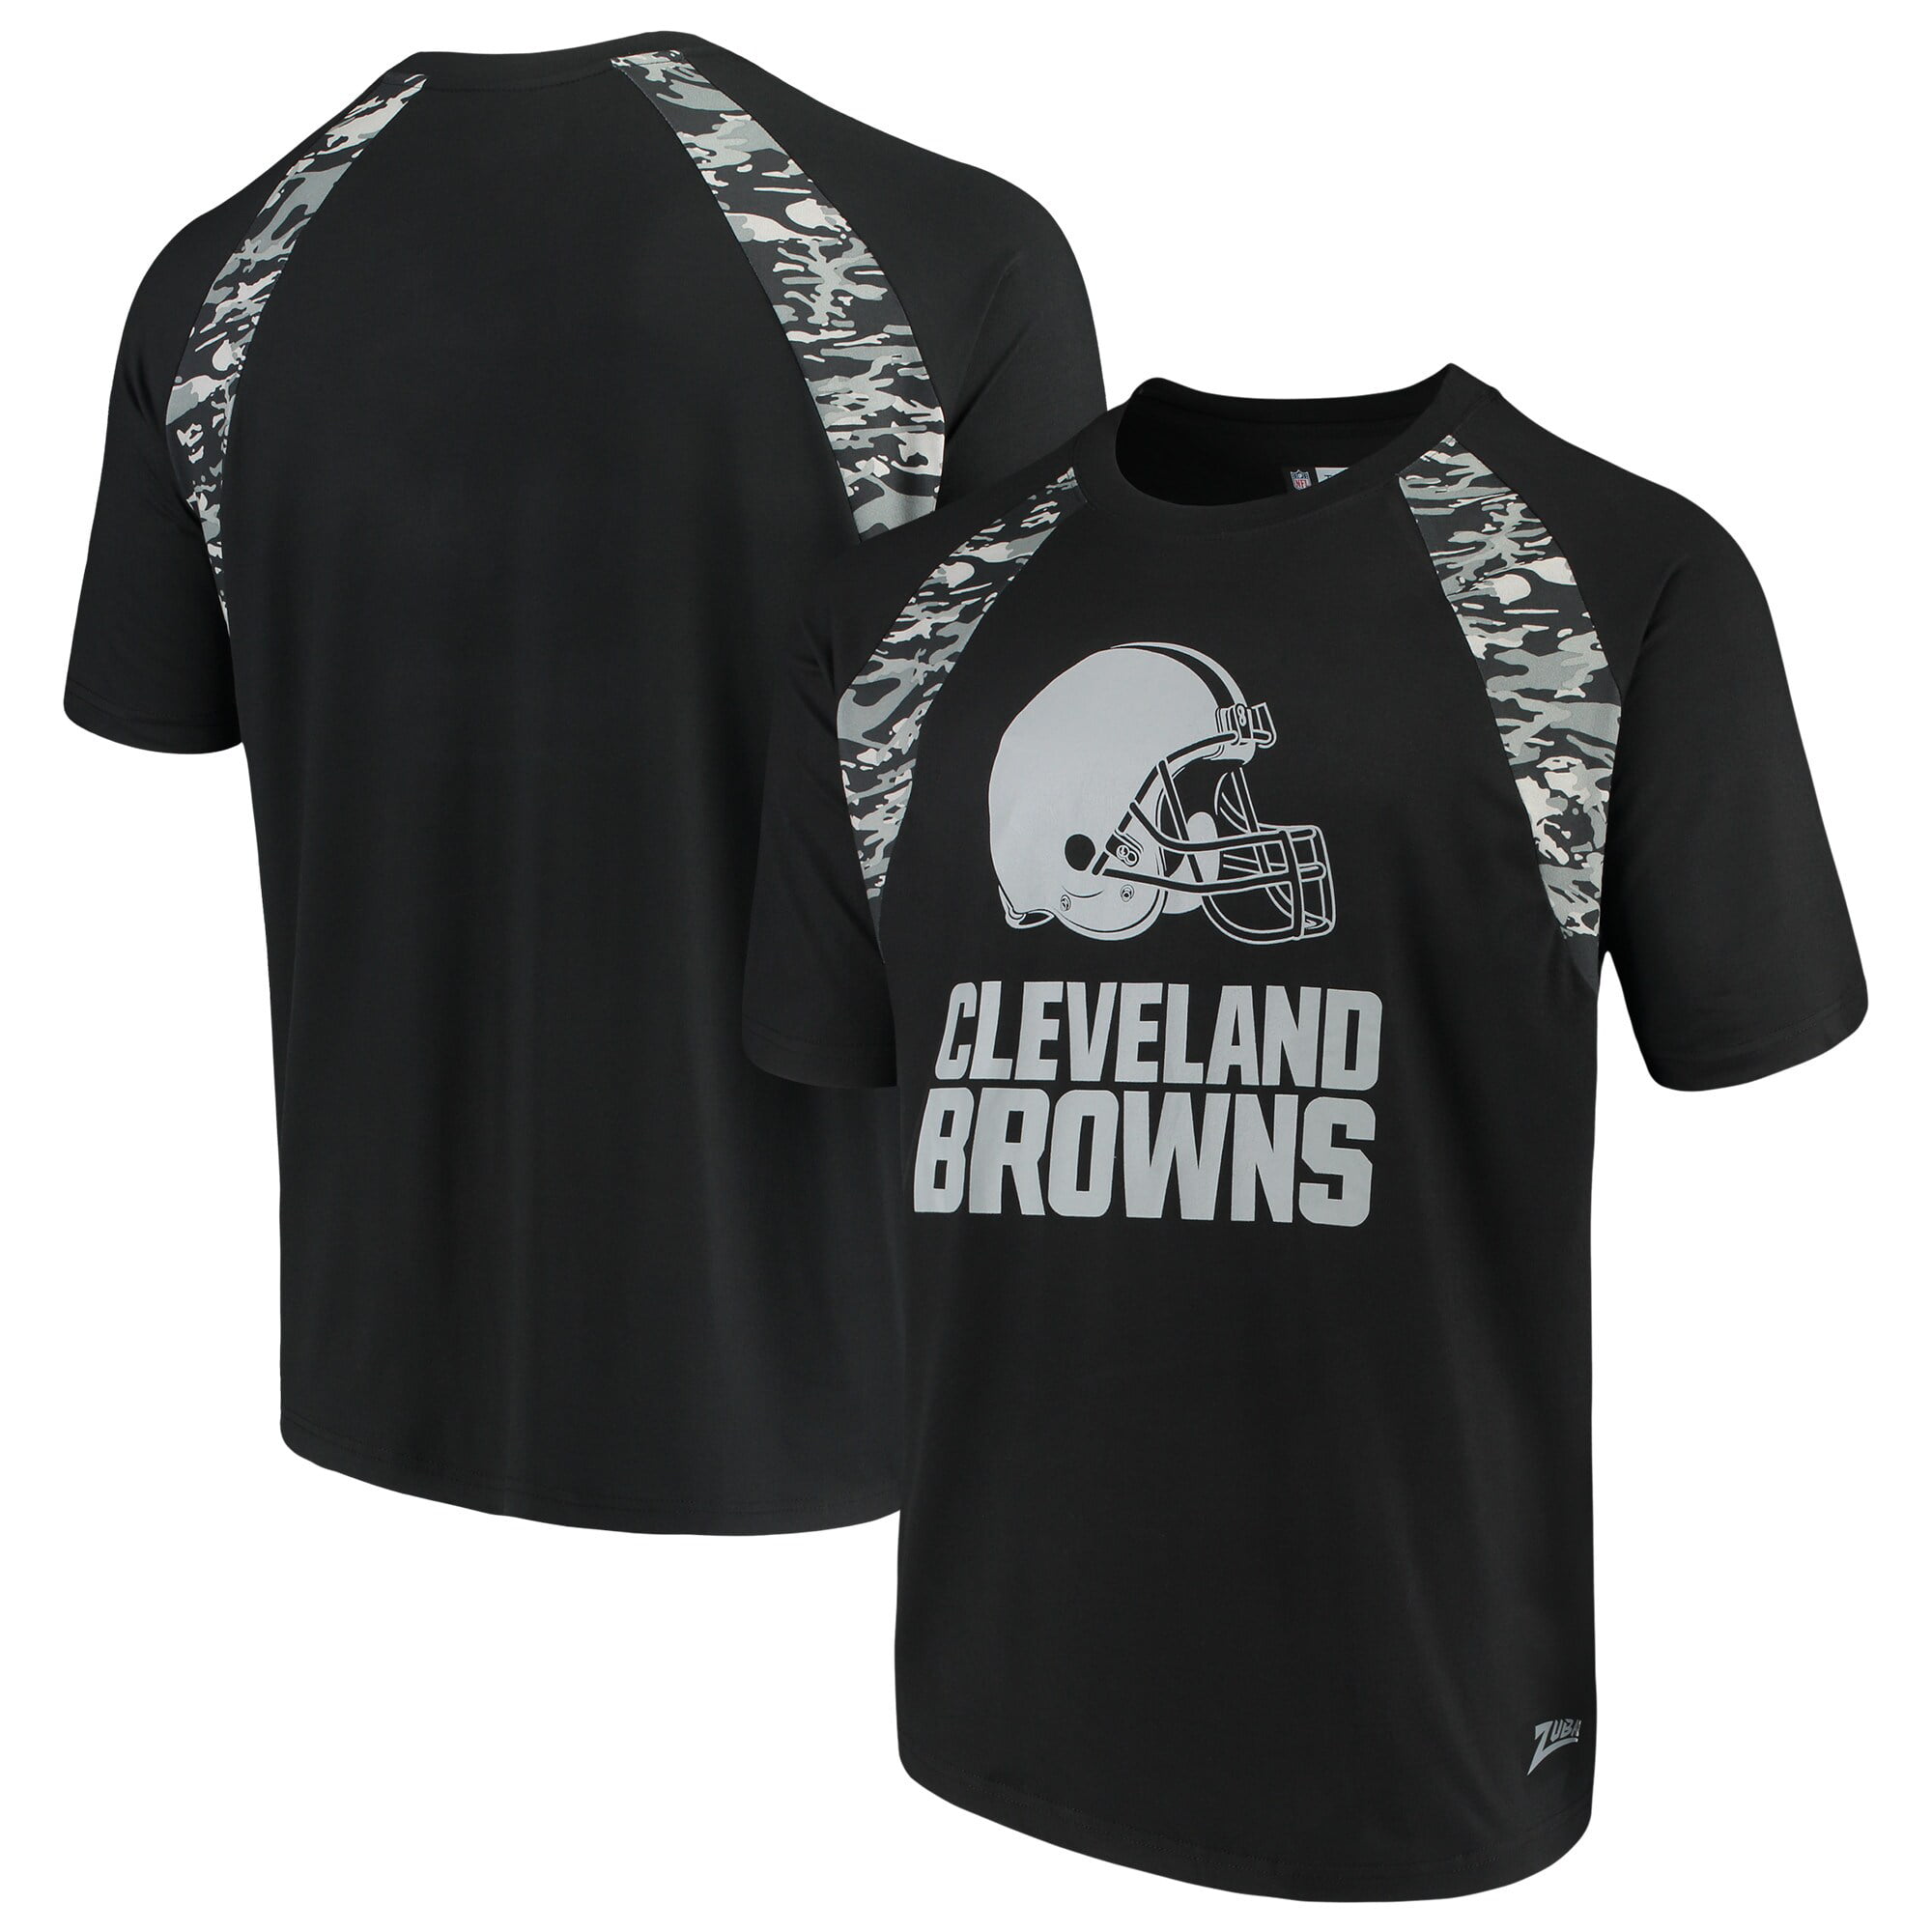 cleveland browns camouflage jersey